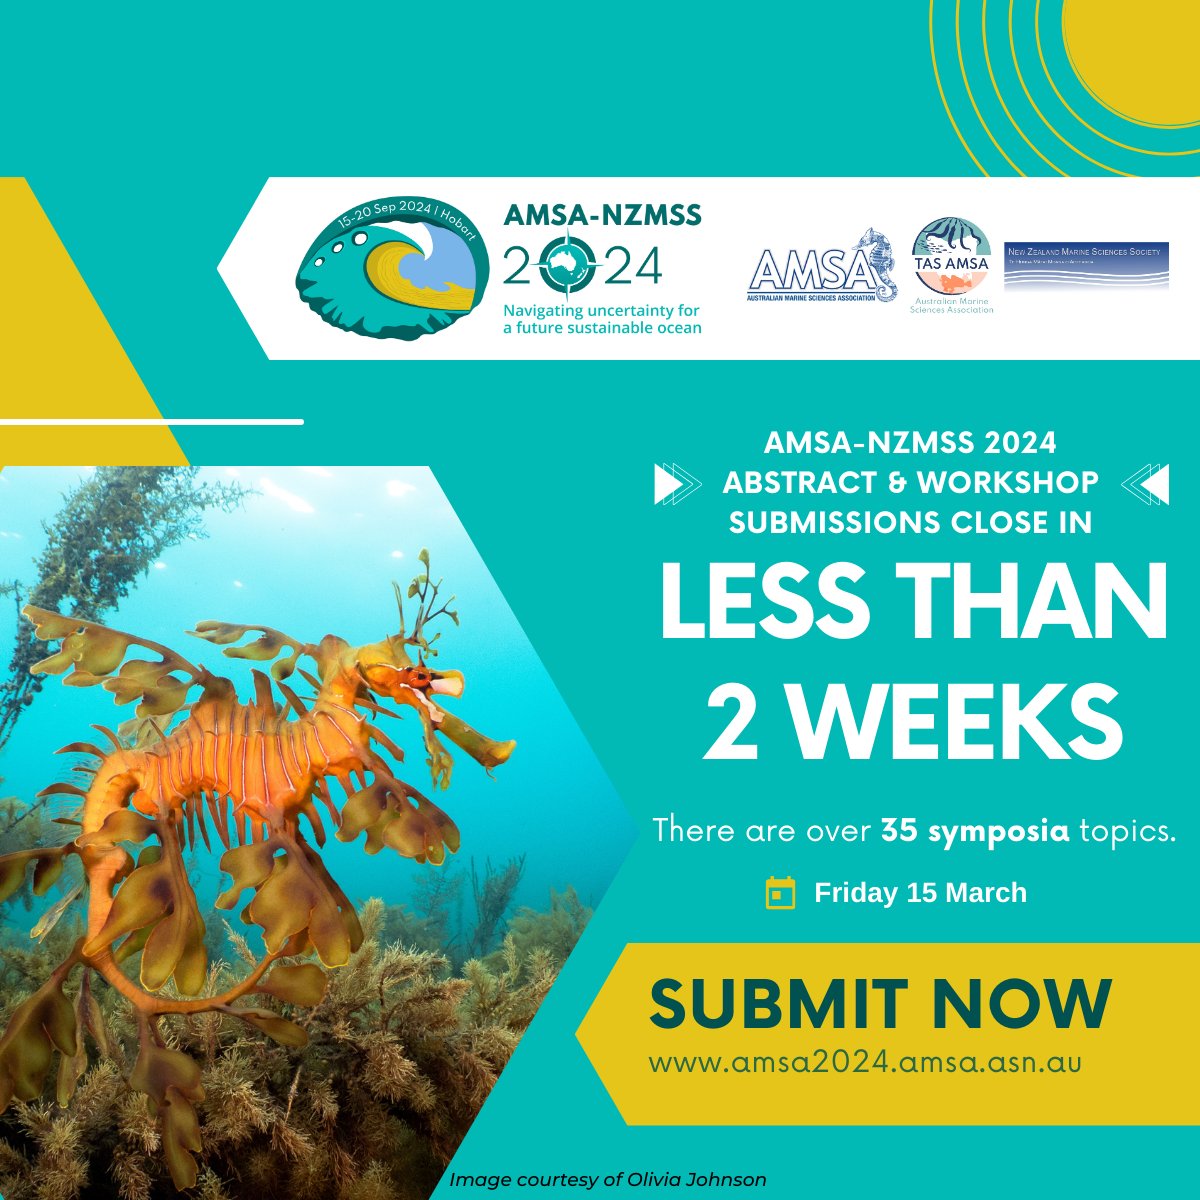 🚨 Reminder: Just under 2 weeks left to submit your abstracts for the @amsa_marine / NZMSS conference in Hobart this September. Don't miss out on this opportunity! For more info, visit: amsa2024.amsa.asn.au 🌊 #AMSA2024